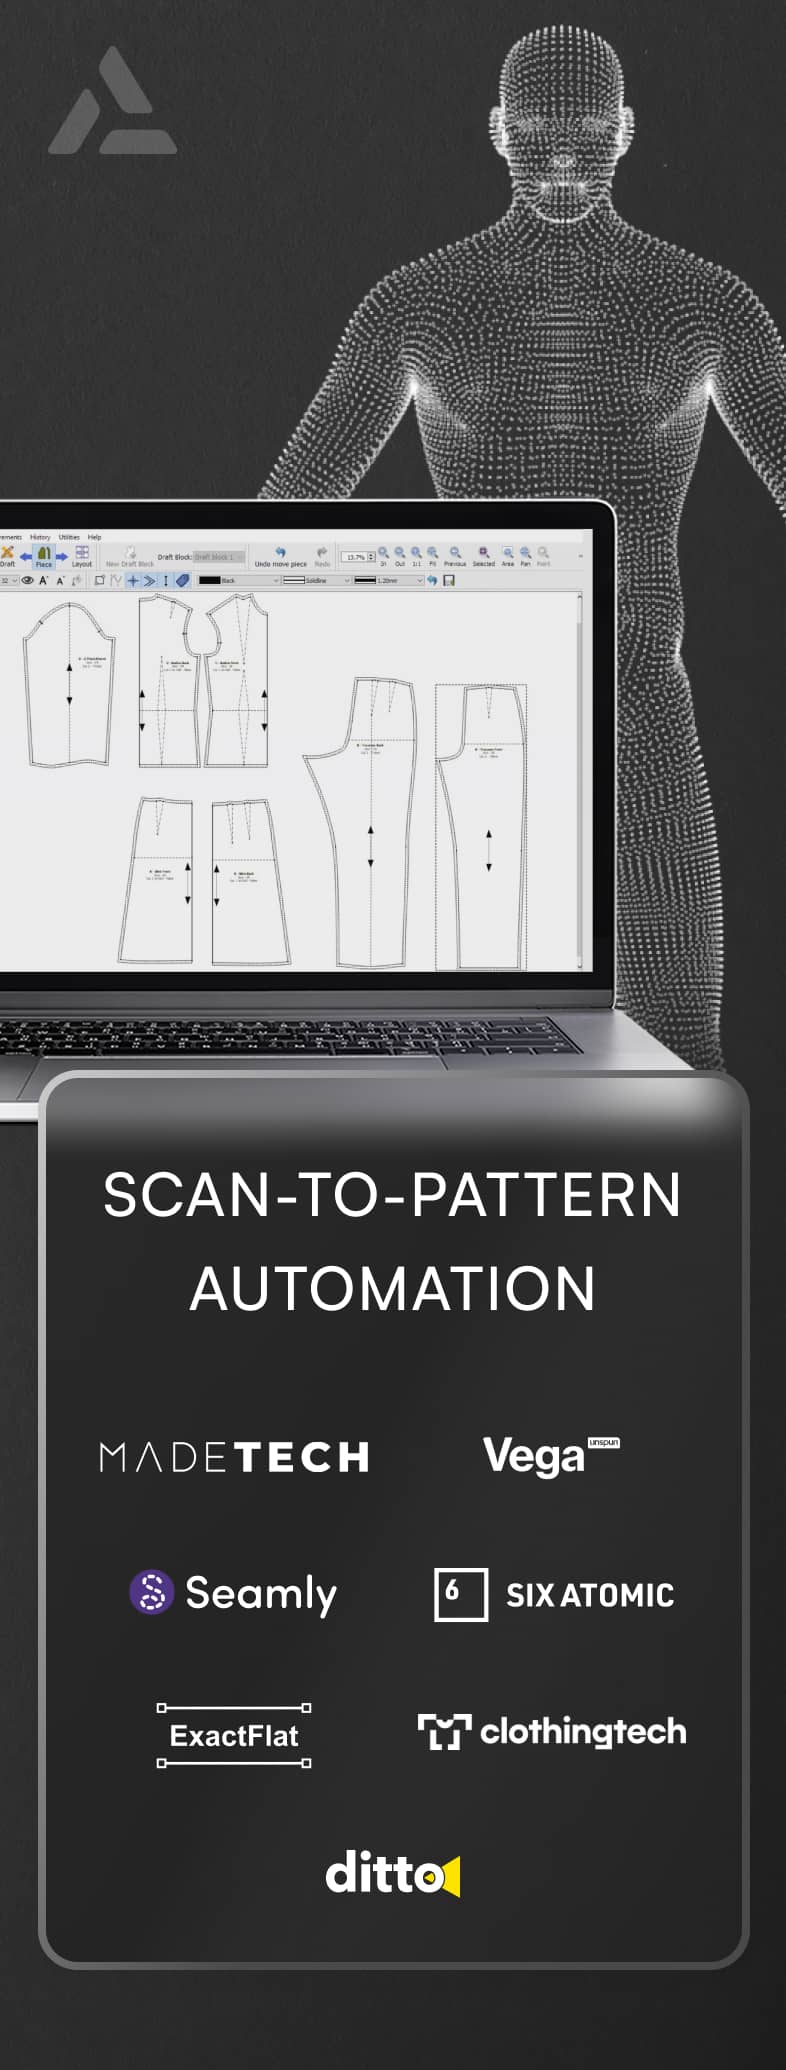 Computer screen displaying digital clothing patterns in front of a wireframe mannequin. Text below reads "Scan-to-Pattern Automation 2024" and lists several company names, including MadeTech, Vega, Seamly, and others. This advancement in industry tech is revolutionizing on-demand fashion.